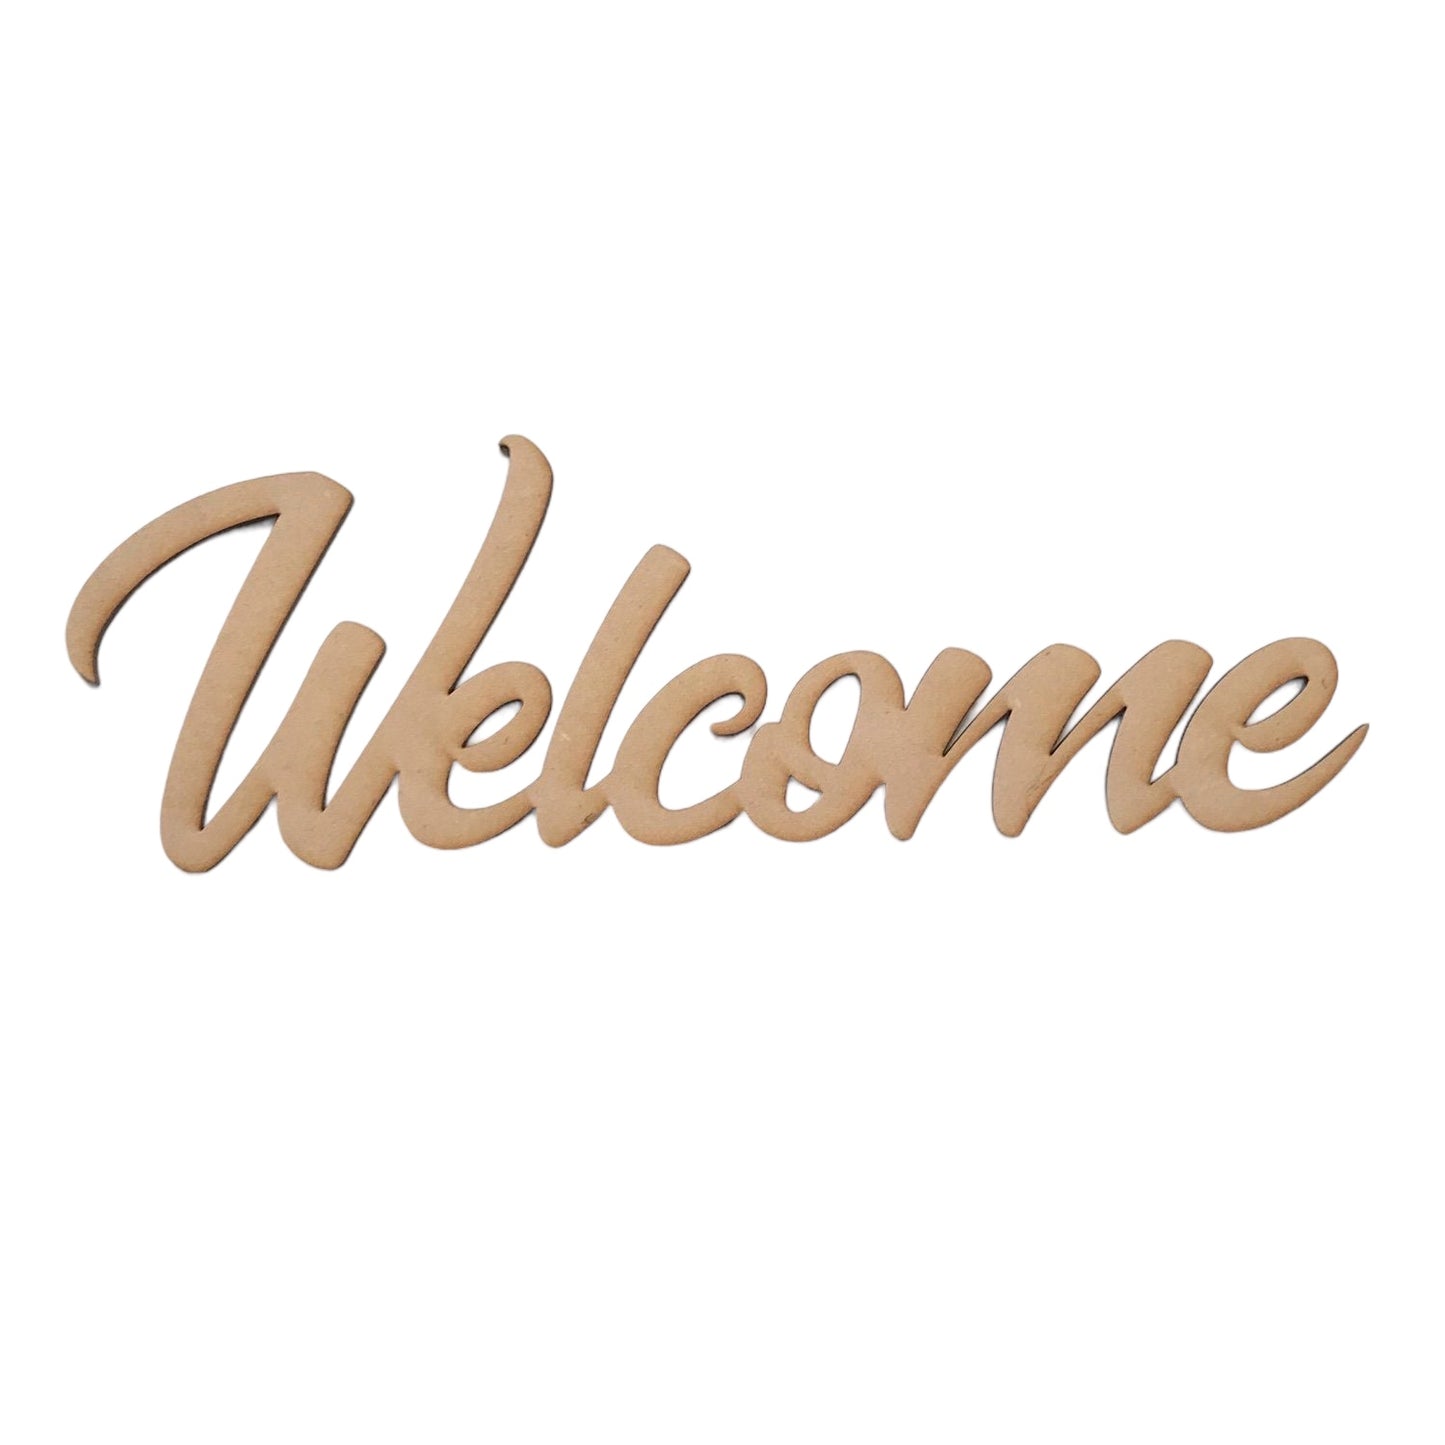 Welcome Sign Rustic Vintage MDF Wood DIY Art Craft - The Renmy Store Homewares & Gifts 